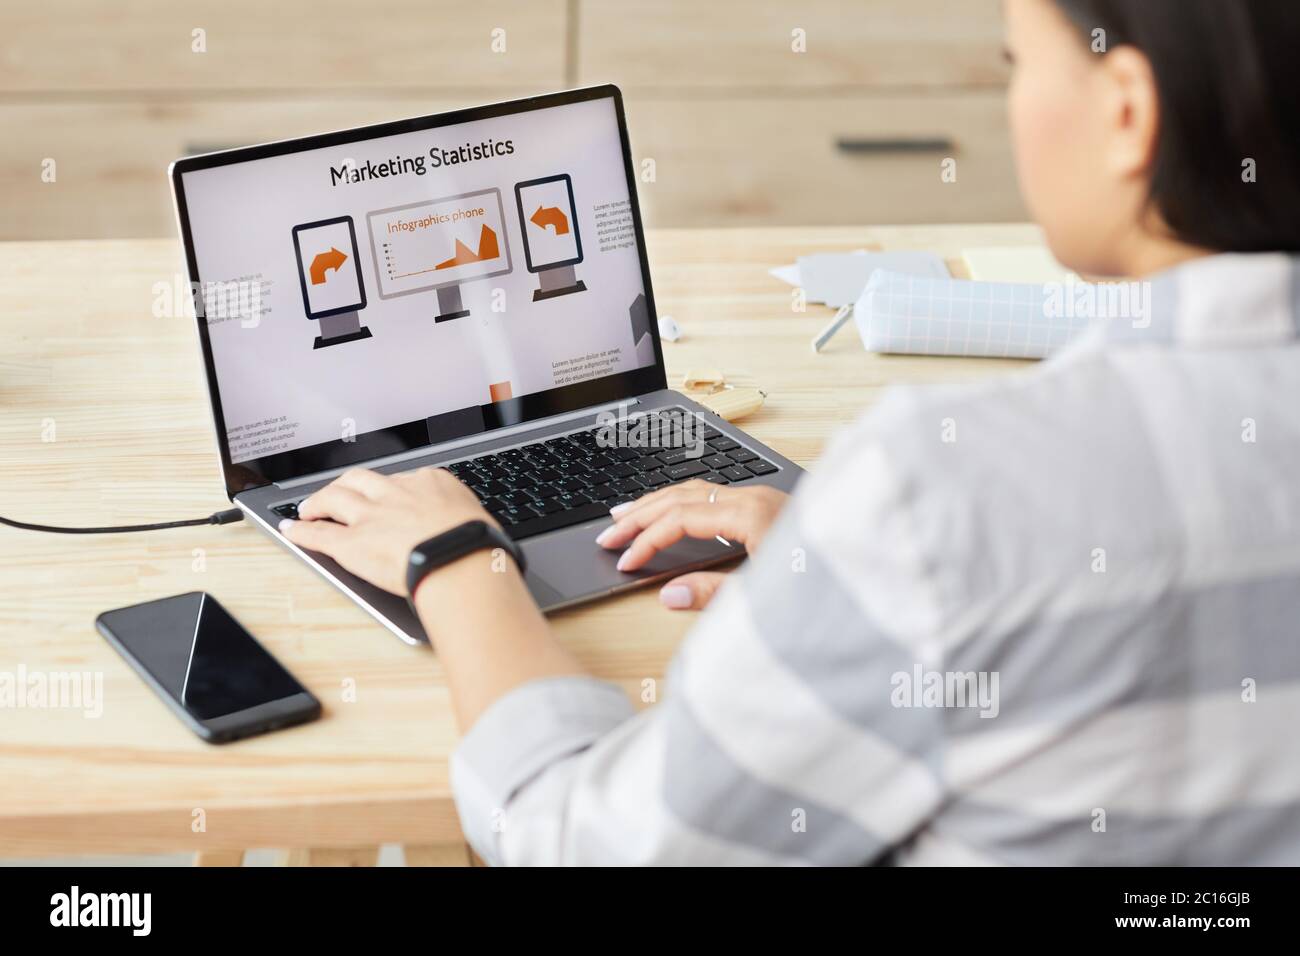 High angle view at young woman looking at laptop screen with Marketing Statistics headline while sitting by wooden table and working at home office, c Stock Photo